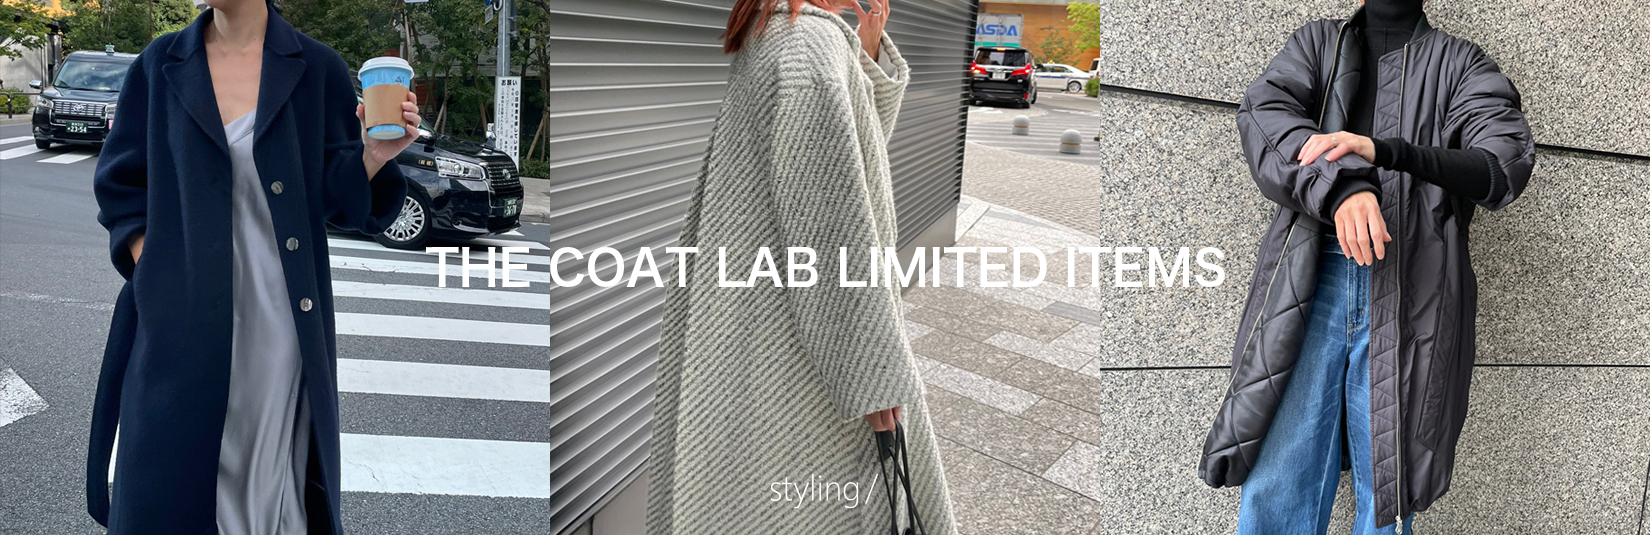 THE COAT LAB LIMITED ITEMS